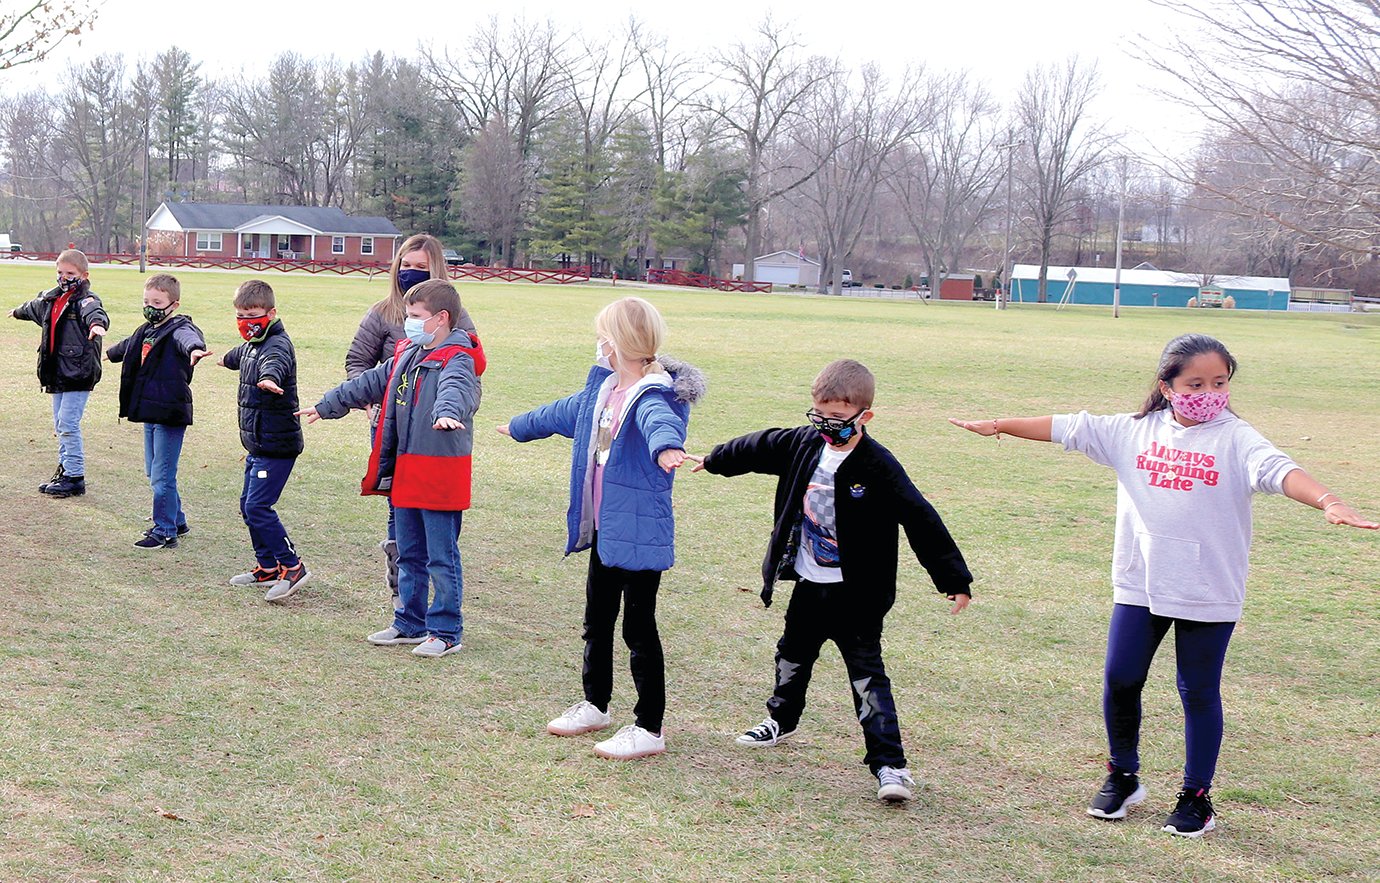 Second-grade students at Sommer Elementary continue following social distancing guidelines and mask regulations as they head outside Friday on a mild December afternoon.